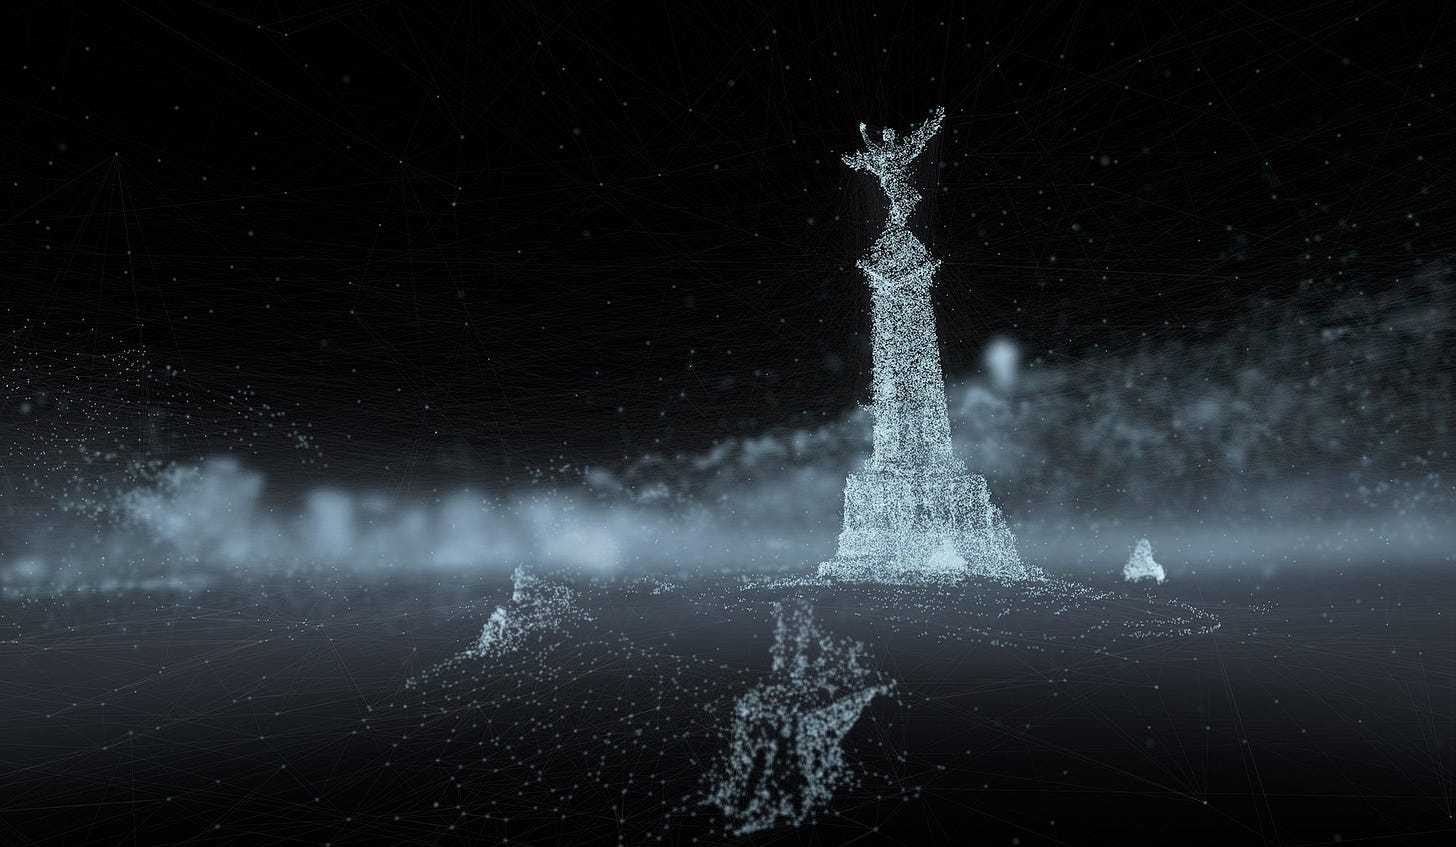 a digital composition depicting points of data rendered as a landmark; a statue of a winged figure on a tall pedestal